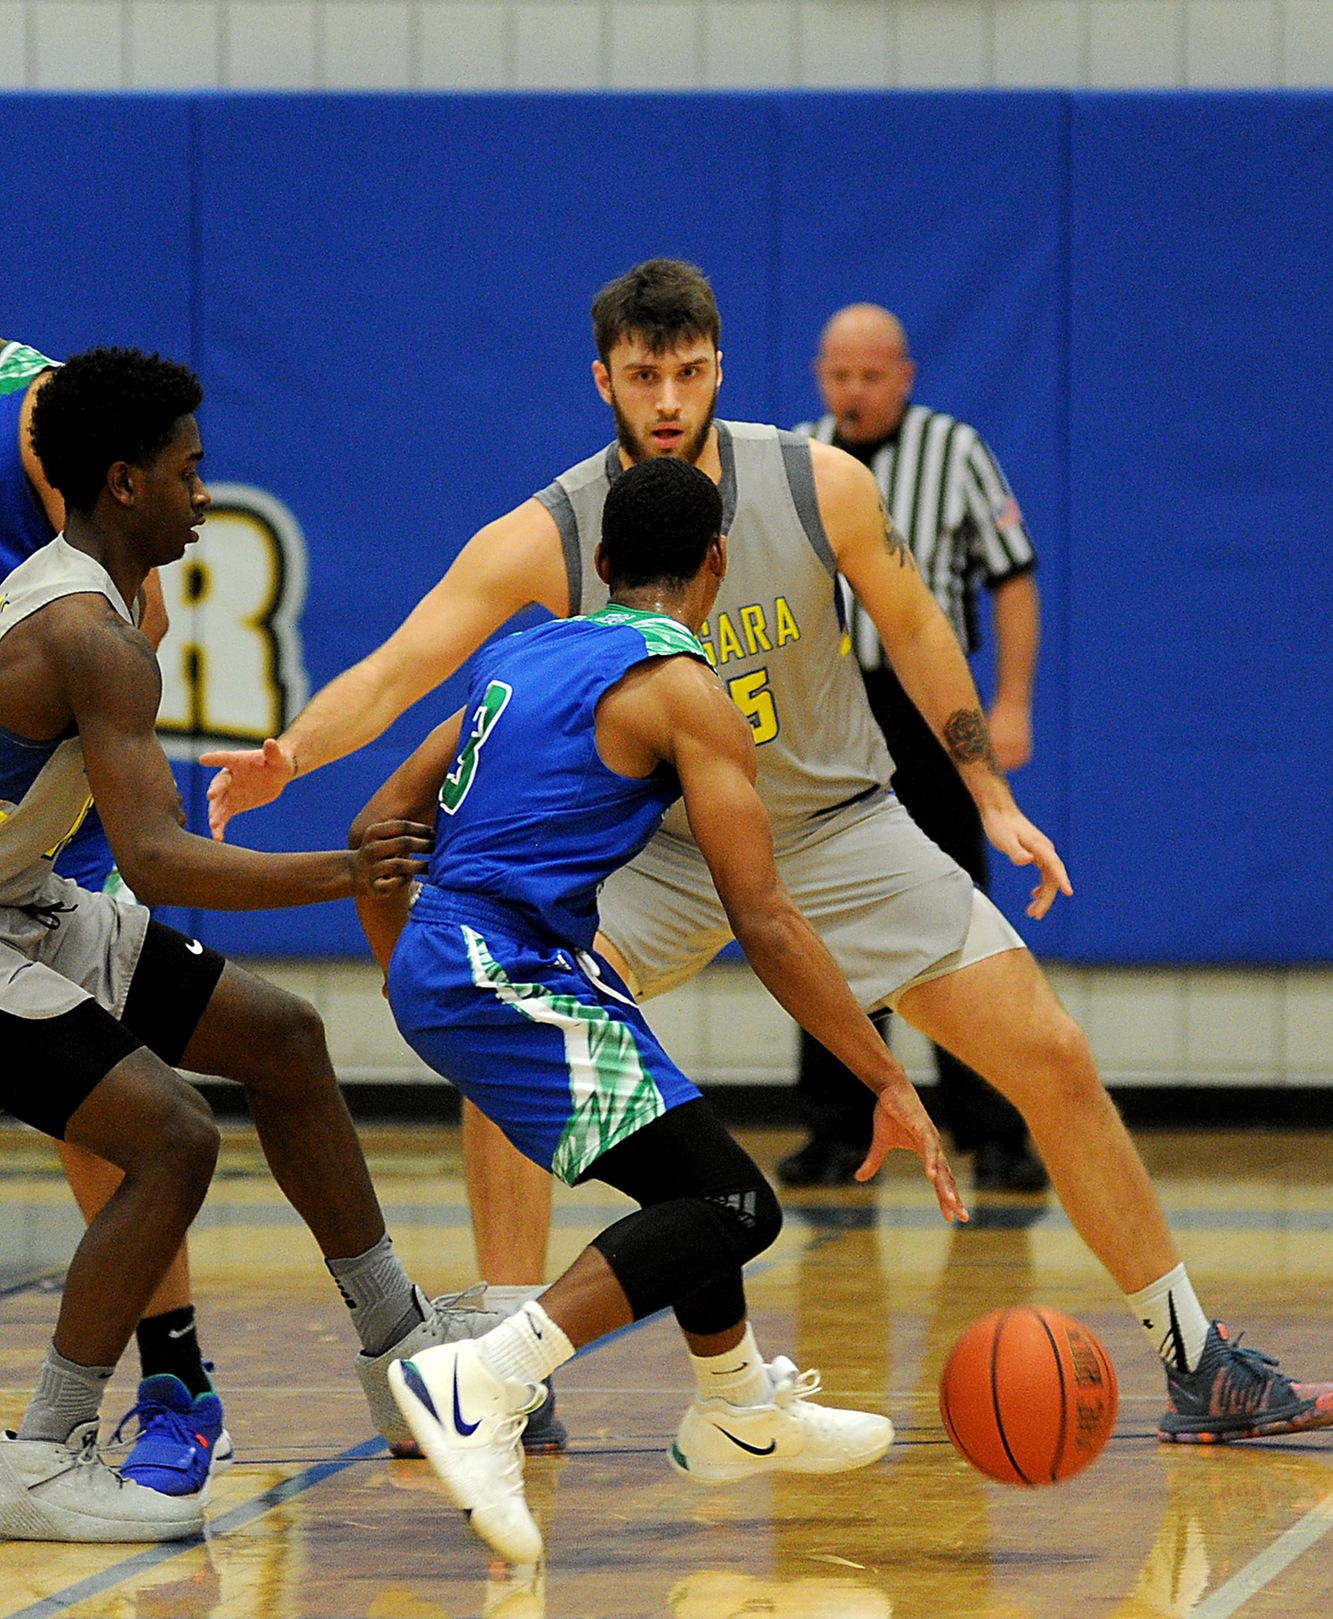 NCCC falls to Kats; earn No. 2 seed in regionals